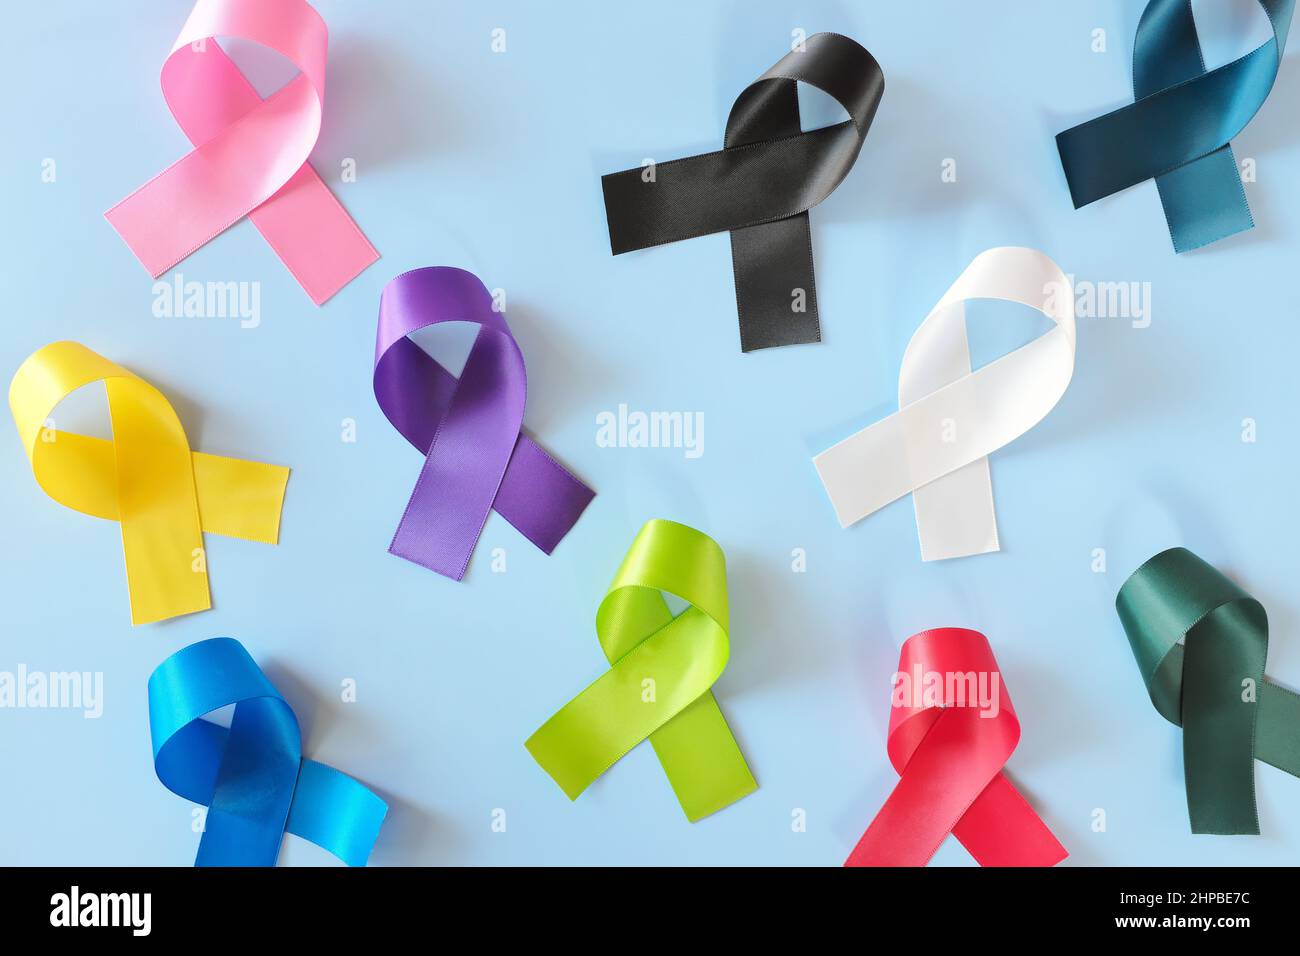 Set of colorful cancer awareness ribbons flat lay in blue background. World Cancer Day concept. Stock Photo